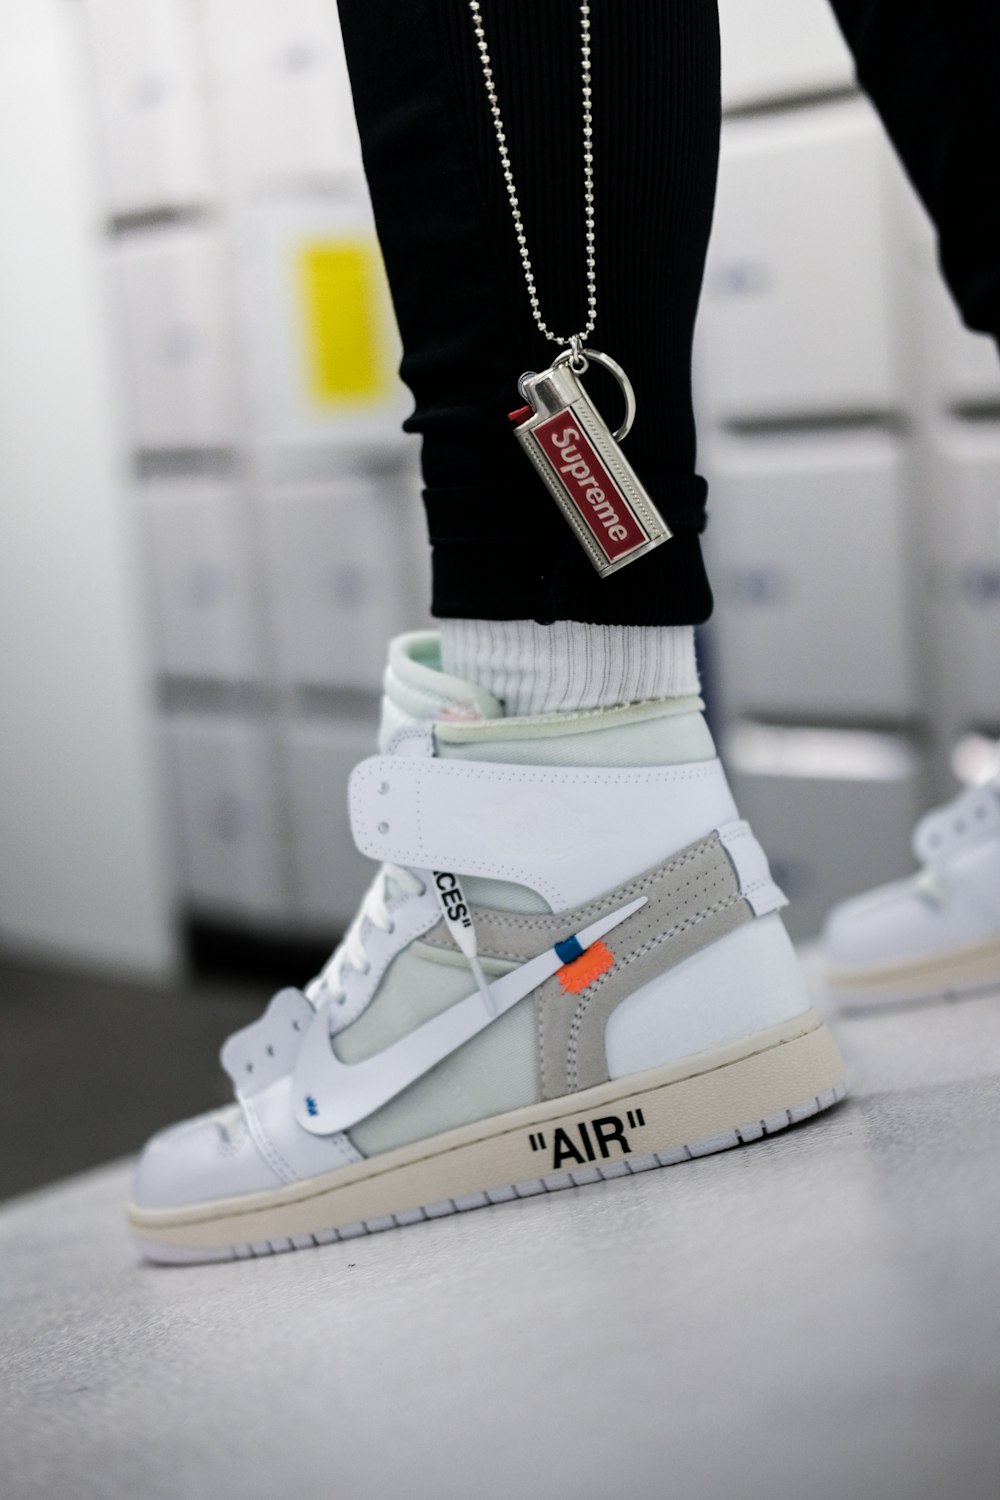 personne portant une chaussure Nike x Off-white